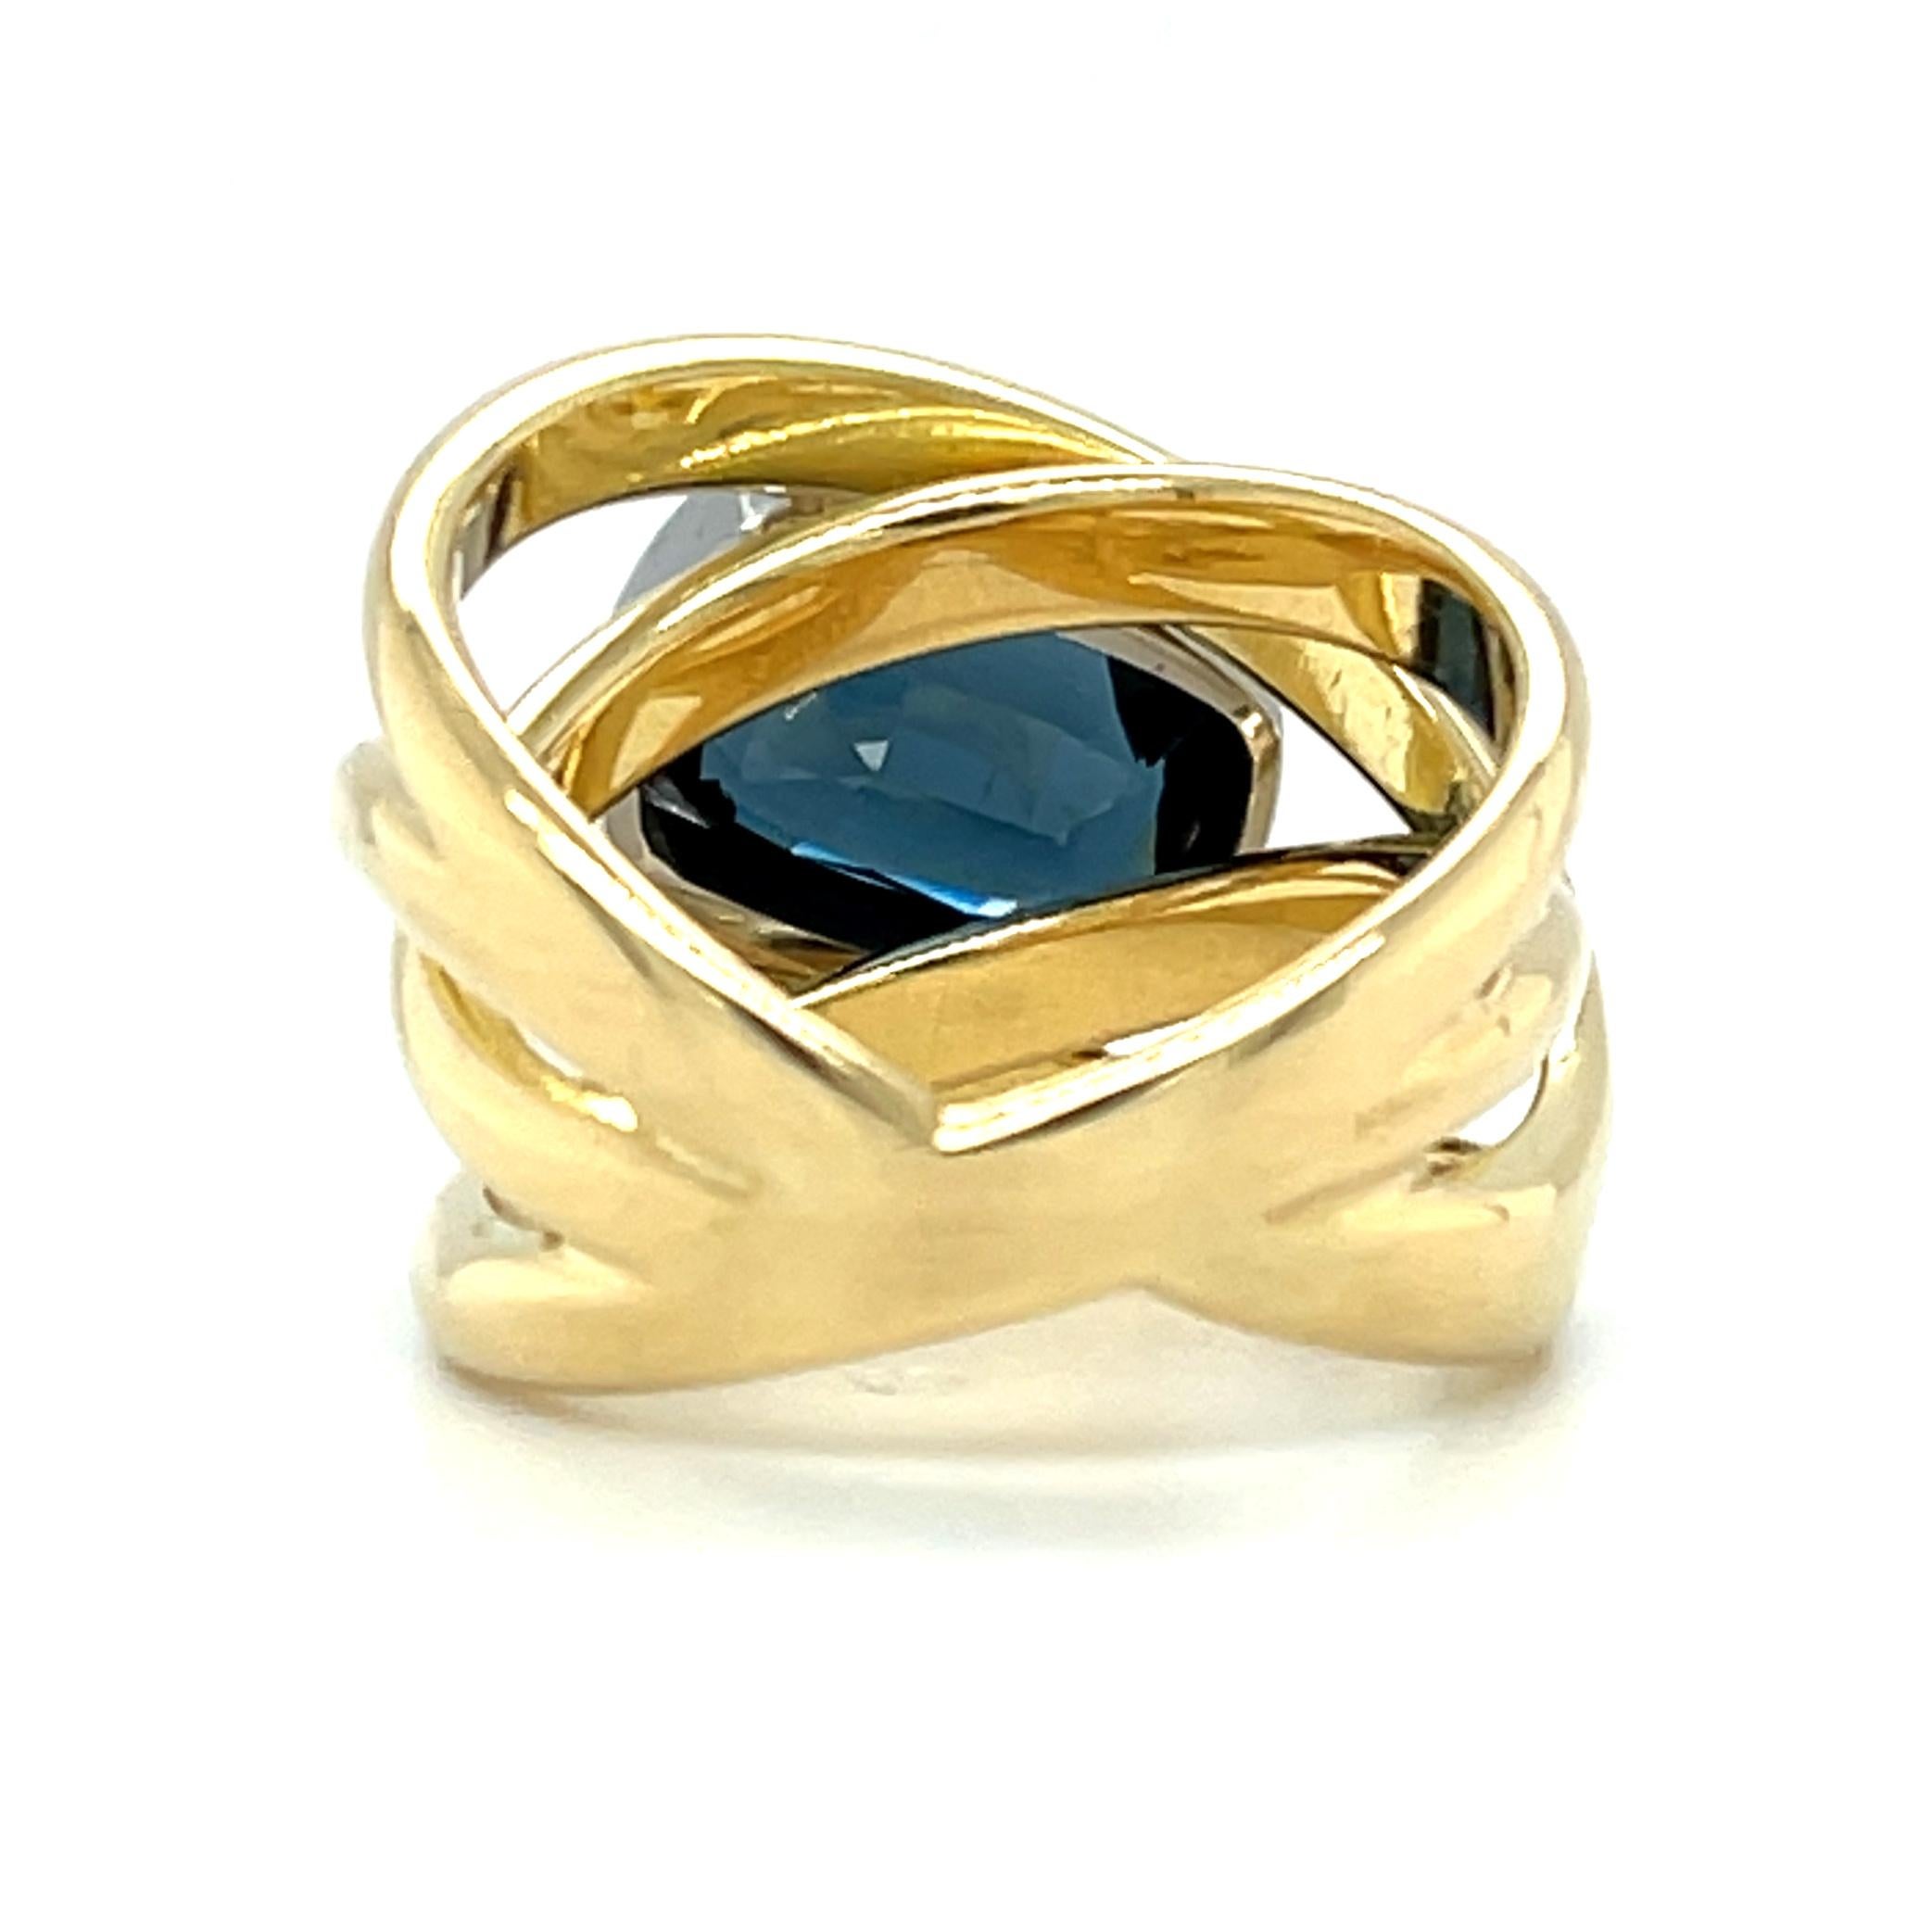 Cushion Cut 4.07 Carat Blue Spinel and 18k Gold Ring   For Sale